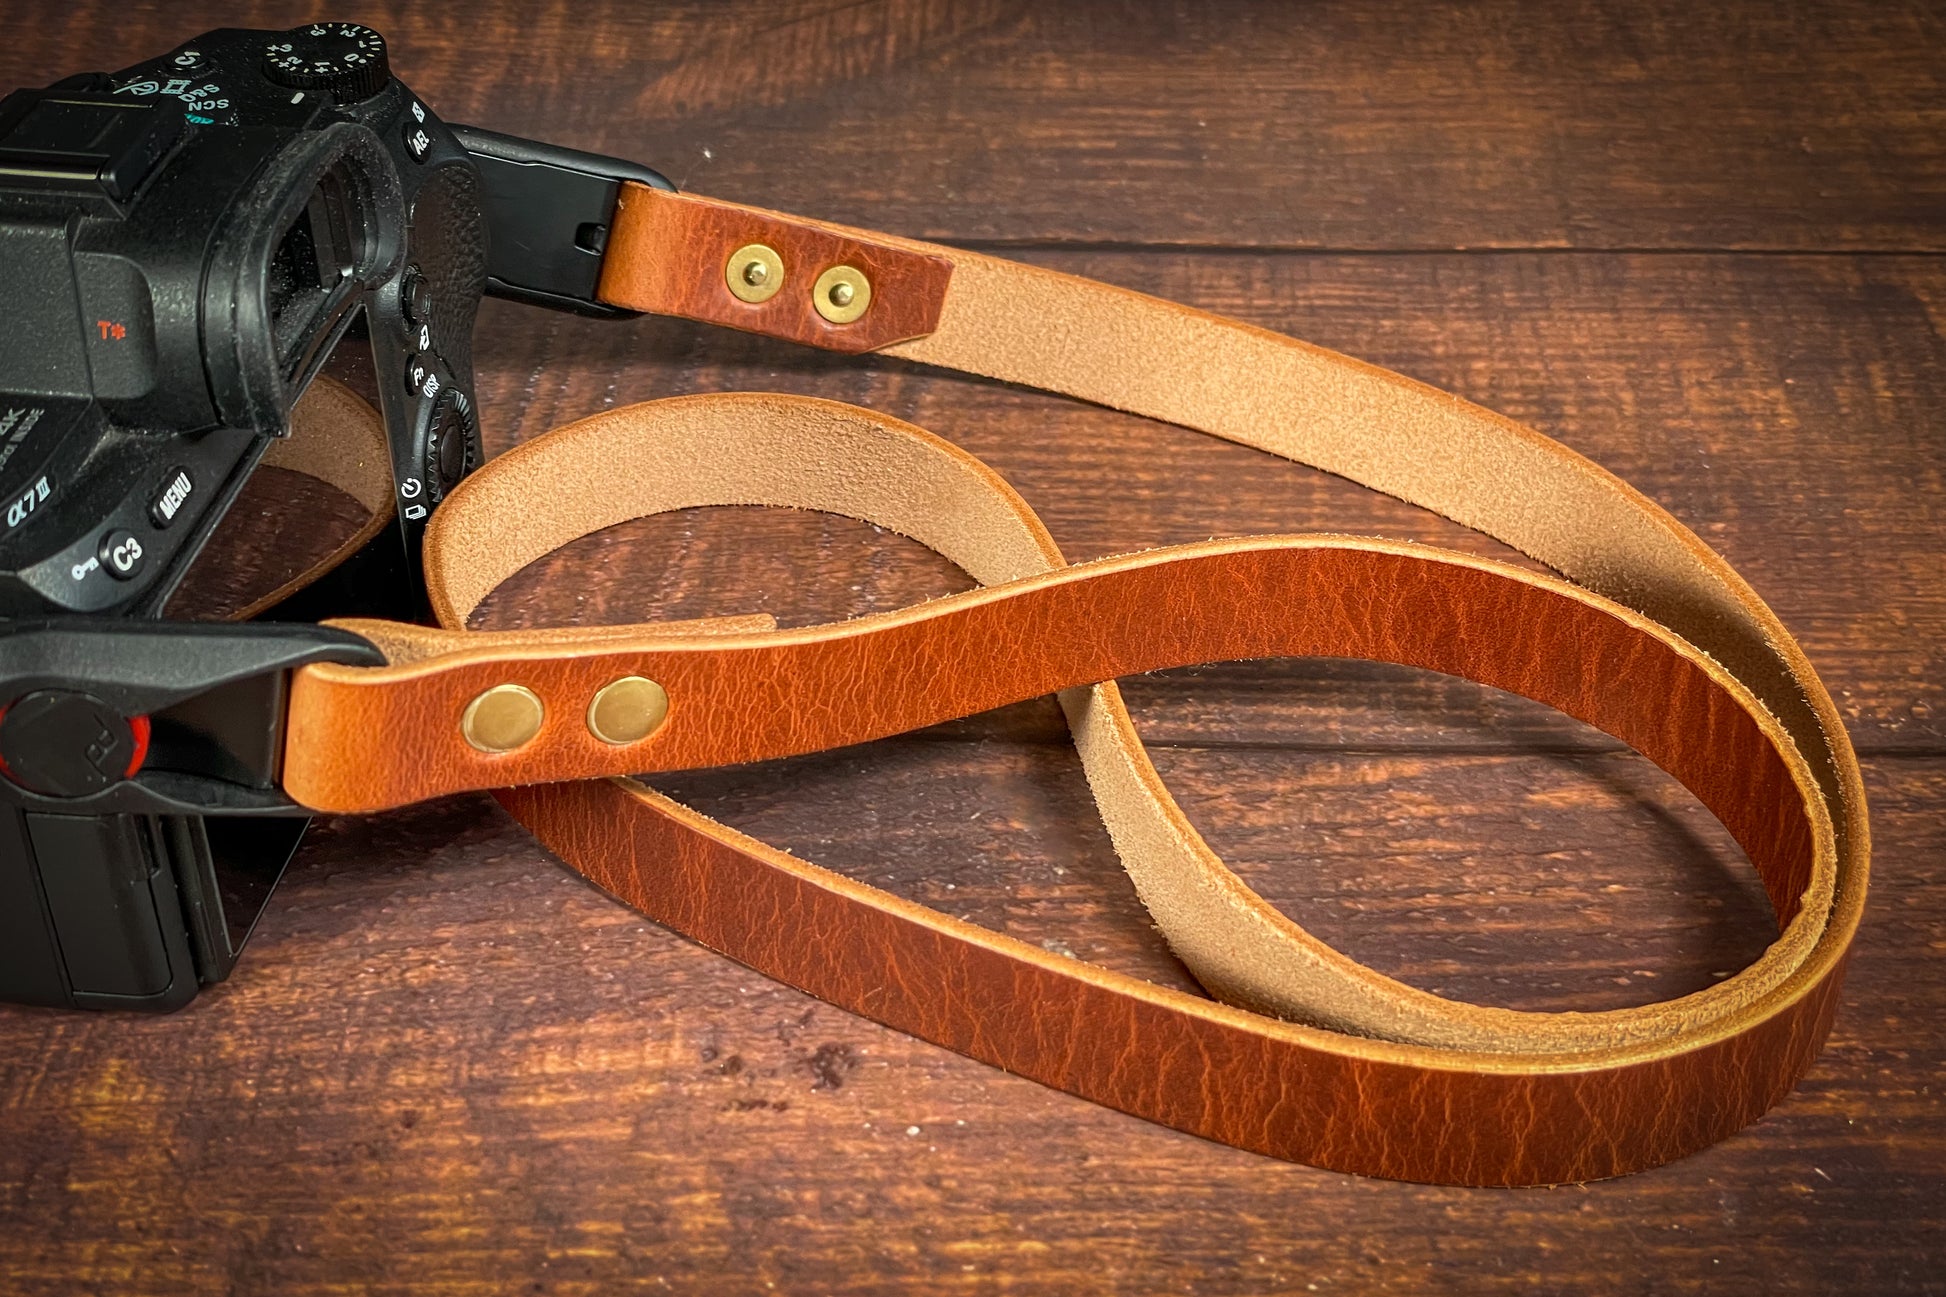 Camera Strap featuring robust Peak Design Anchor Links for secure connectivity